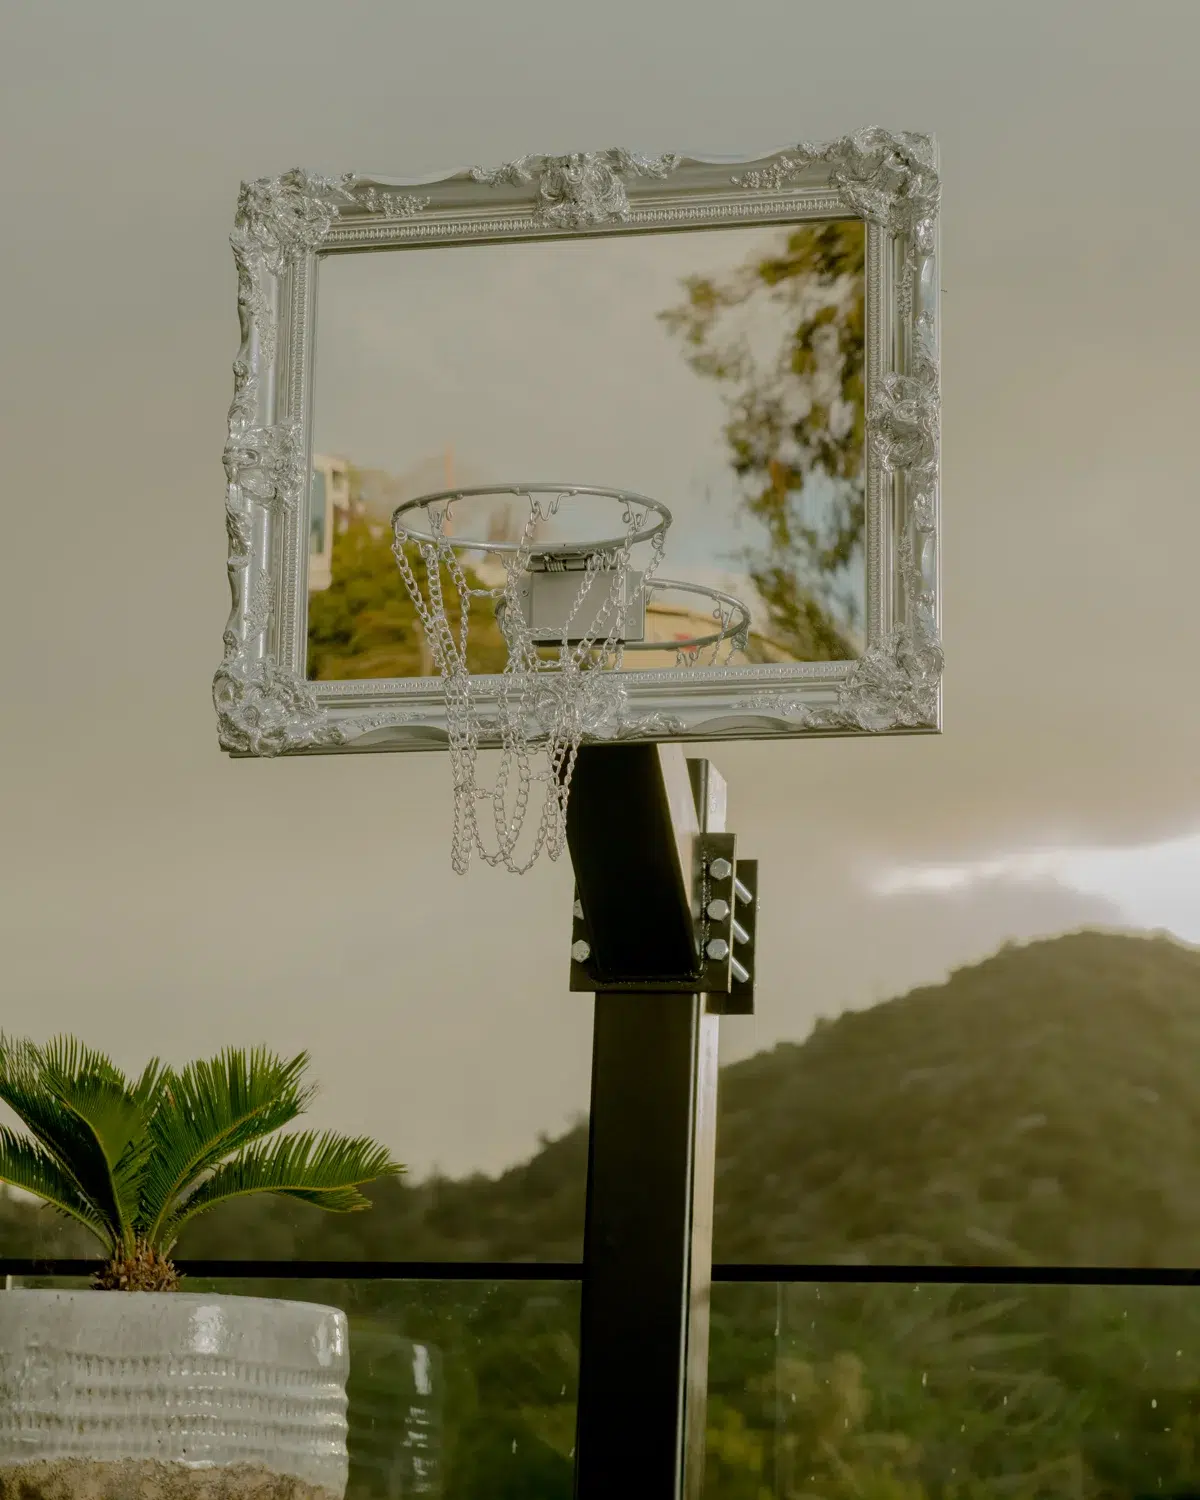 A reflective hoop frame within a mirrored design.